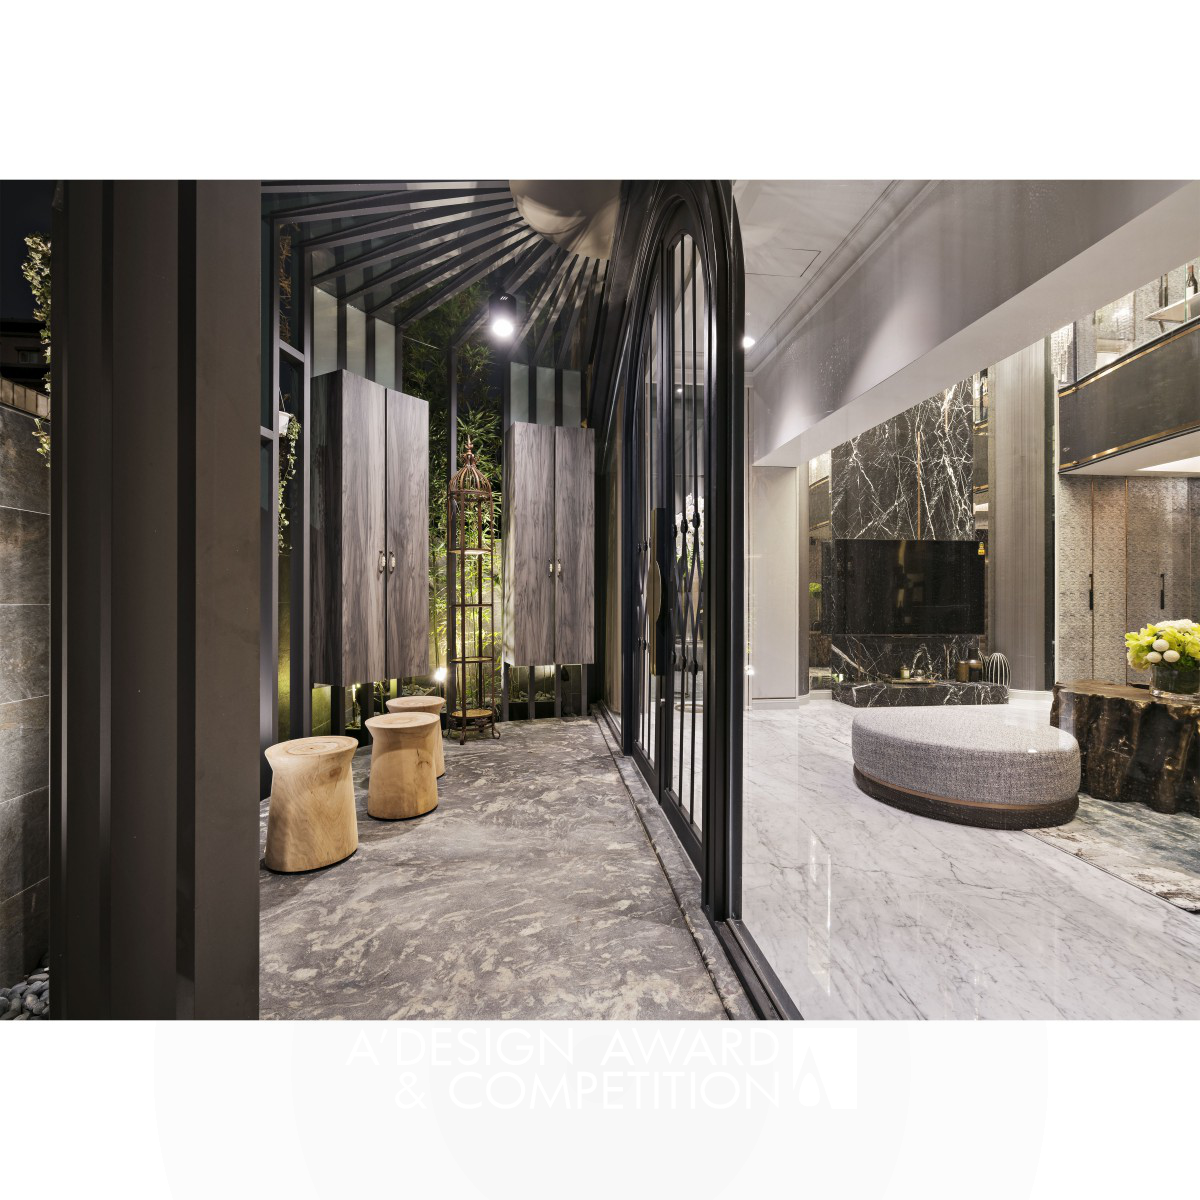 Lo Fang Ming wins Bronze at the prestigious A' Interior Space, Retail and Exhibition Design Award with Castle of Fairy Tale Residential House.